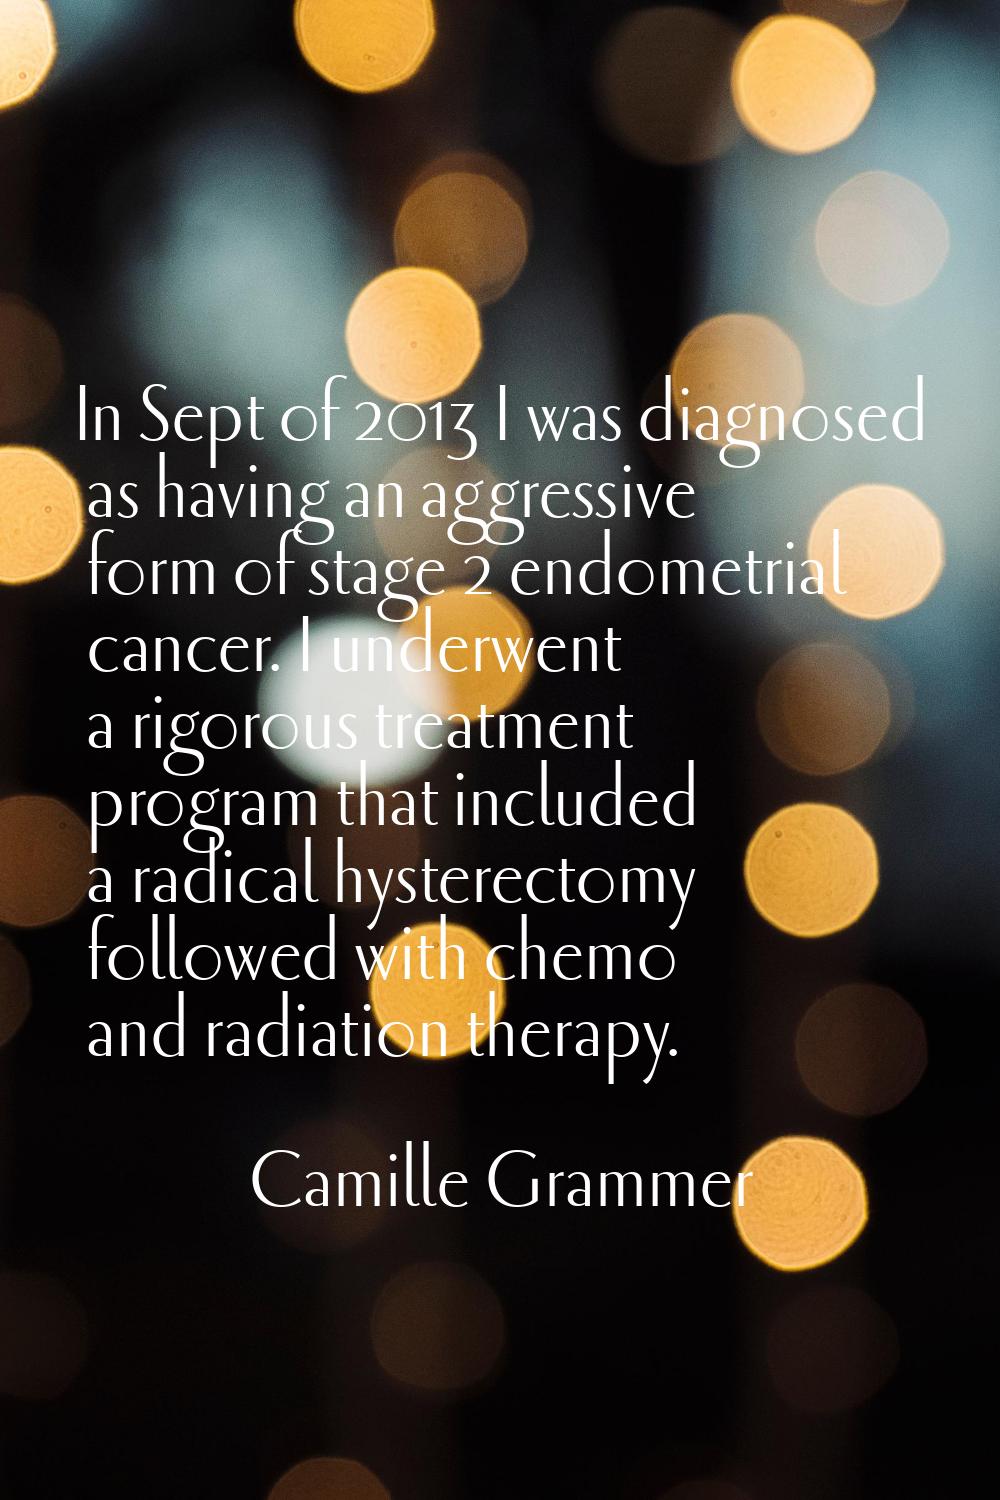 In Sept of 2013 I was diagnosed as having an aggressive form of stage 2 endometrial cancer. I under